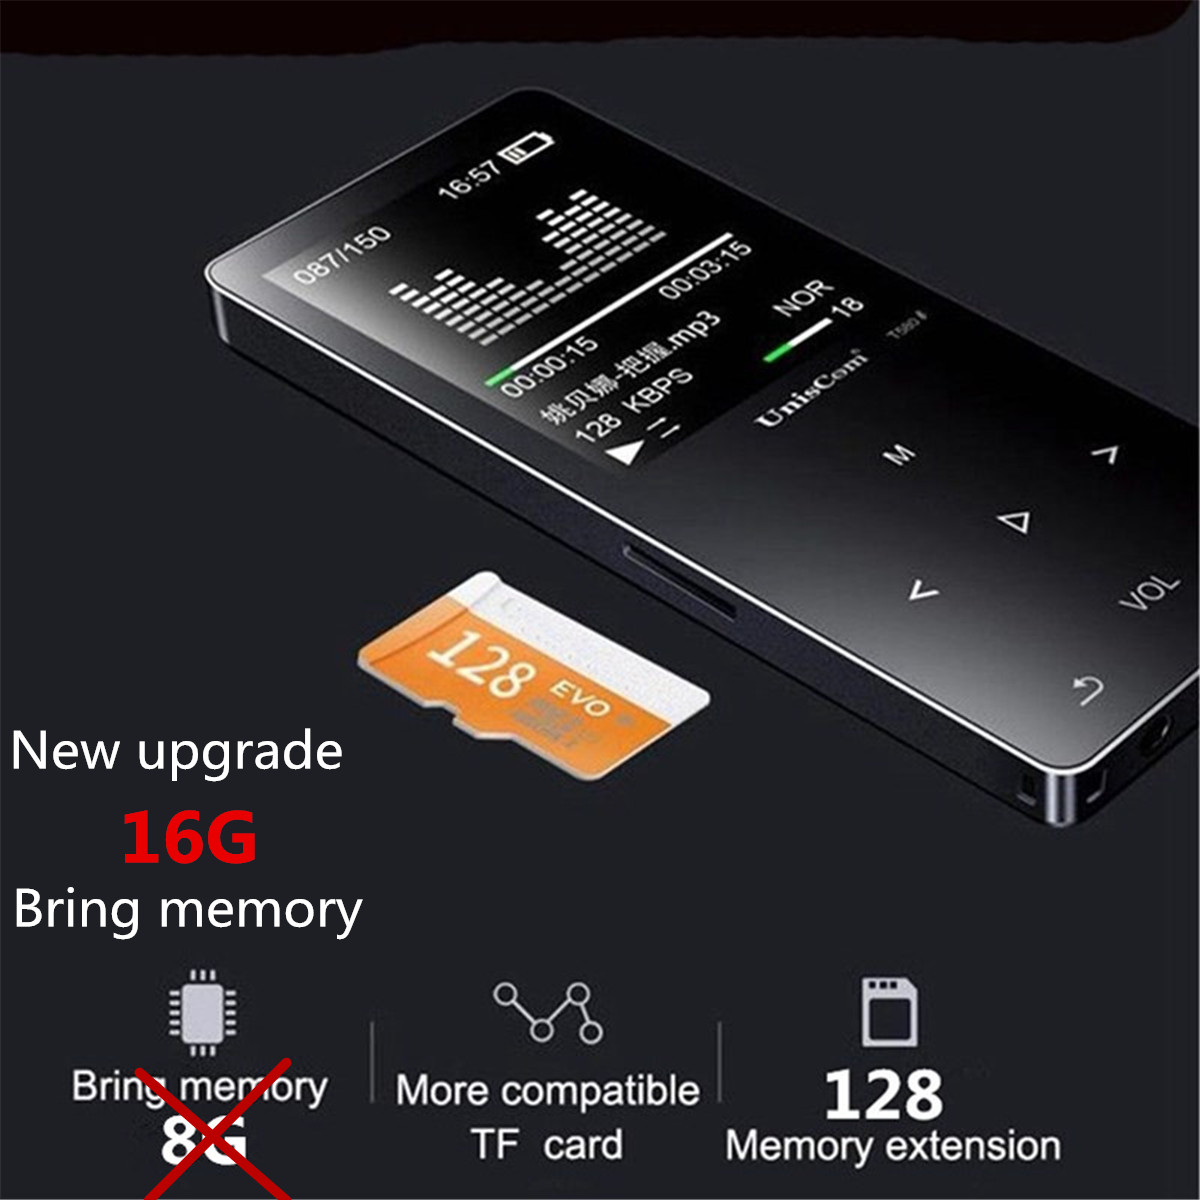 Uniscom 8G 1.8 Inch Screen bluetooth Lossless HIFI MP3 Music Player Support A-B Repeat Voice Record 14